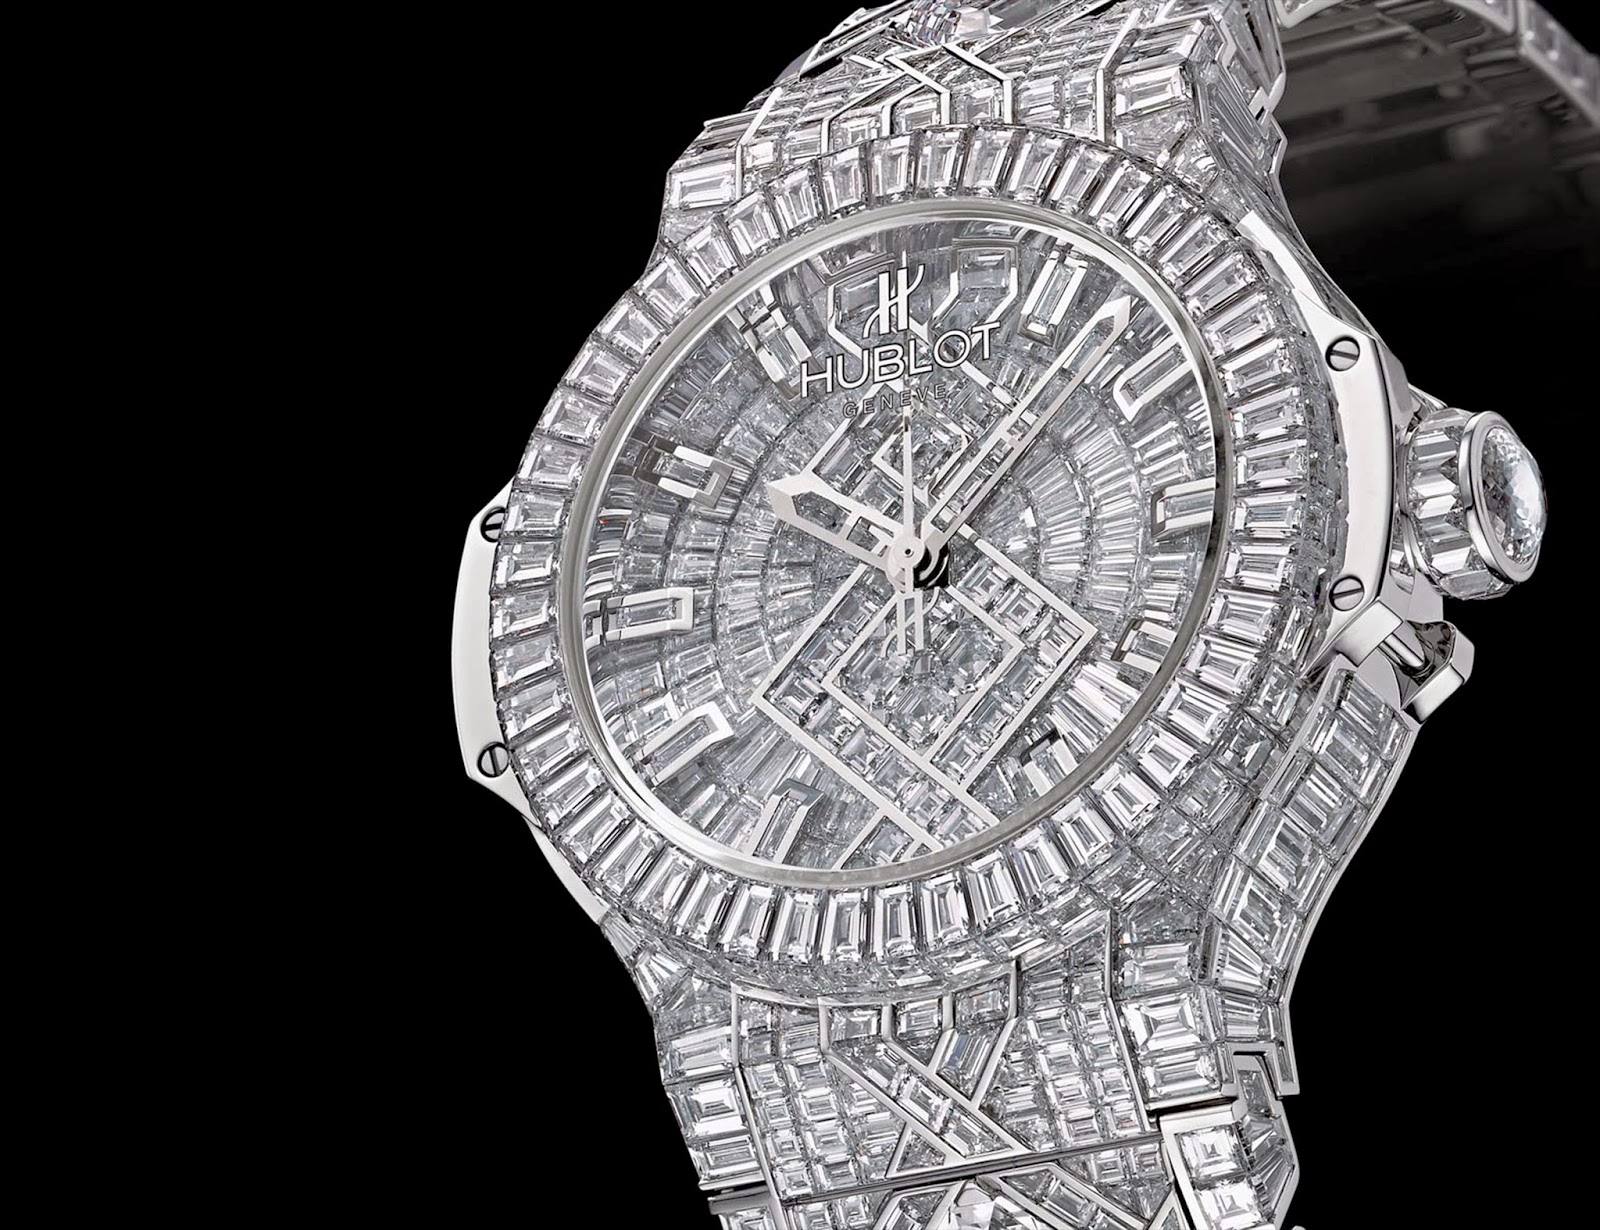 most-expensive-watches-in-the-world-2014-4-done.jpg